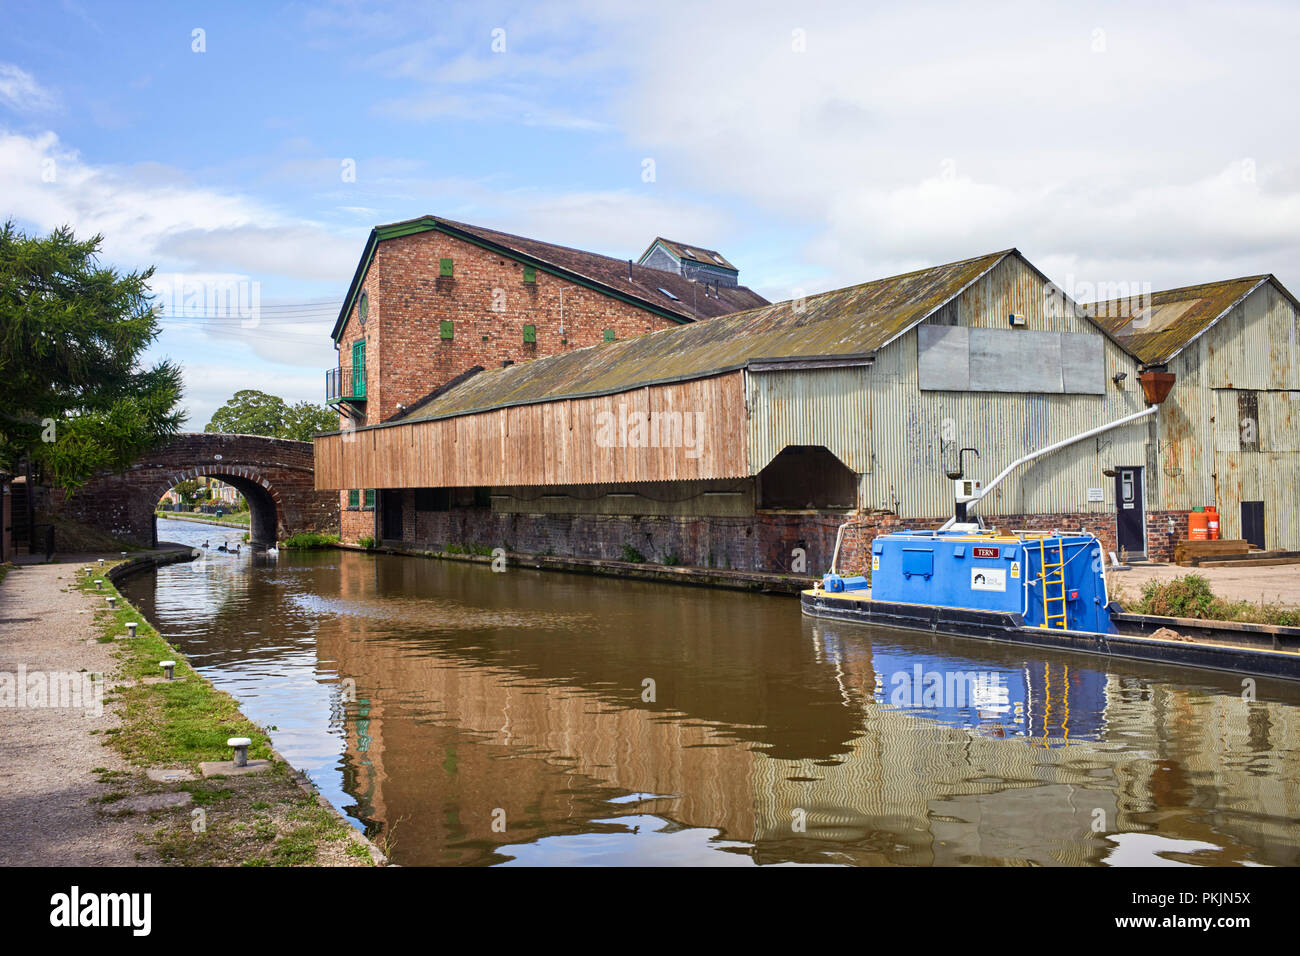 Warehouse and overhanging canopy at Market Drayton on the Shropshire Union canal Stock Photo